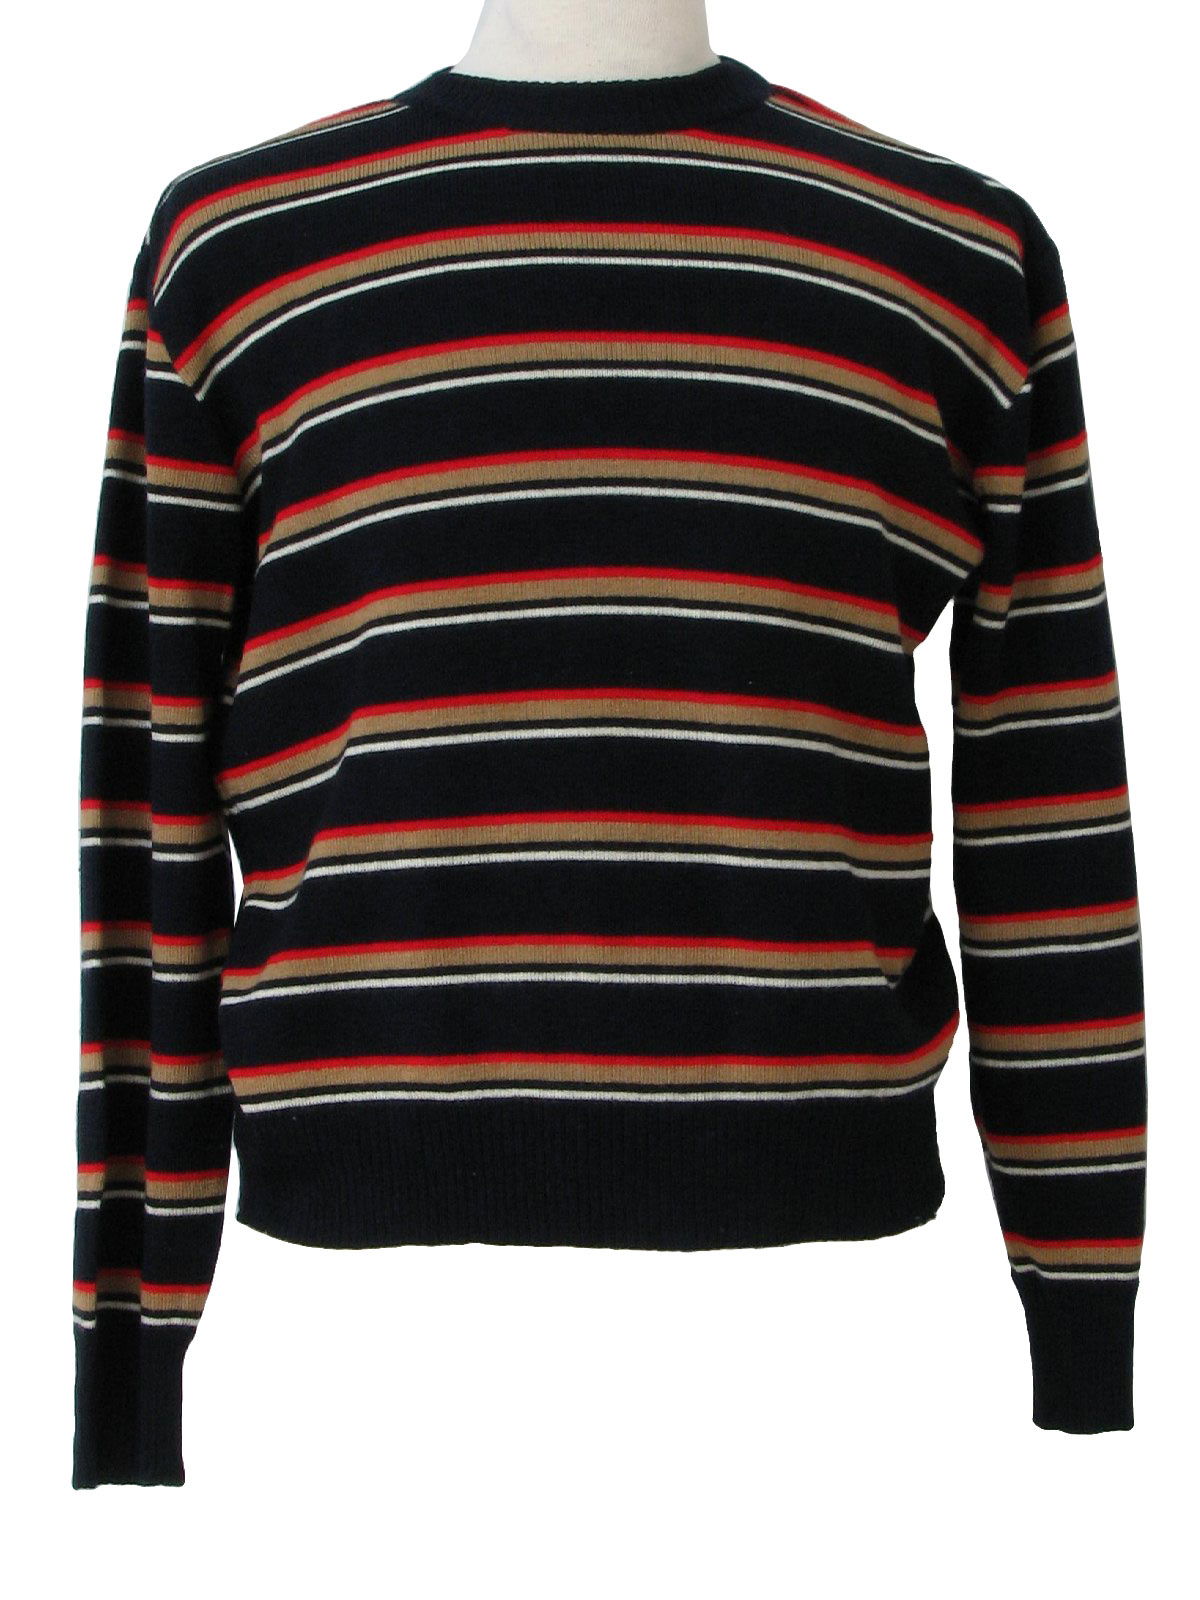 1970's Vintage Townsley Sweater: 70s -Townsley- Mens blue, red, white ...